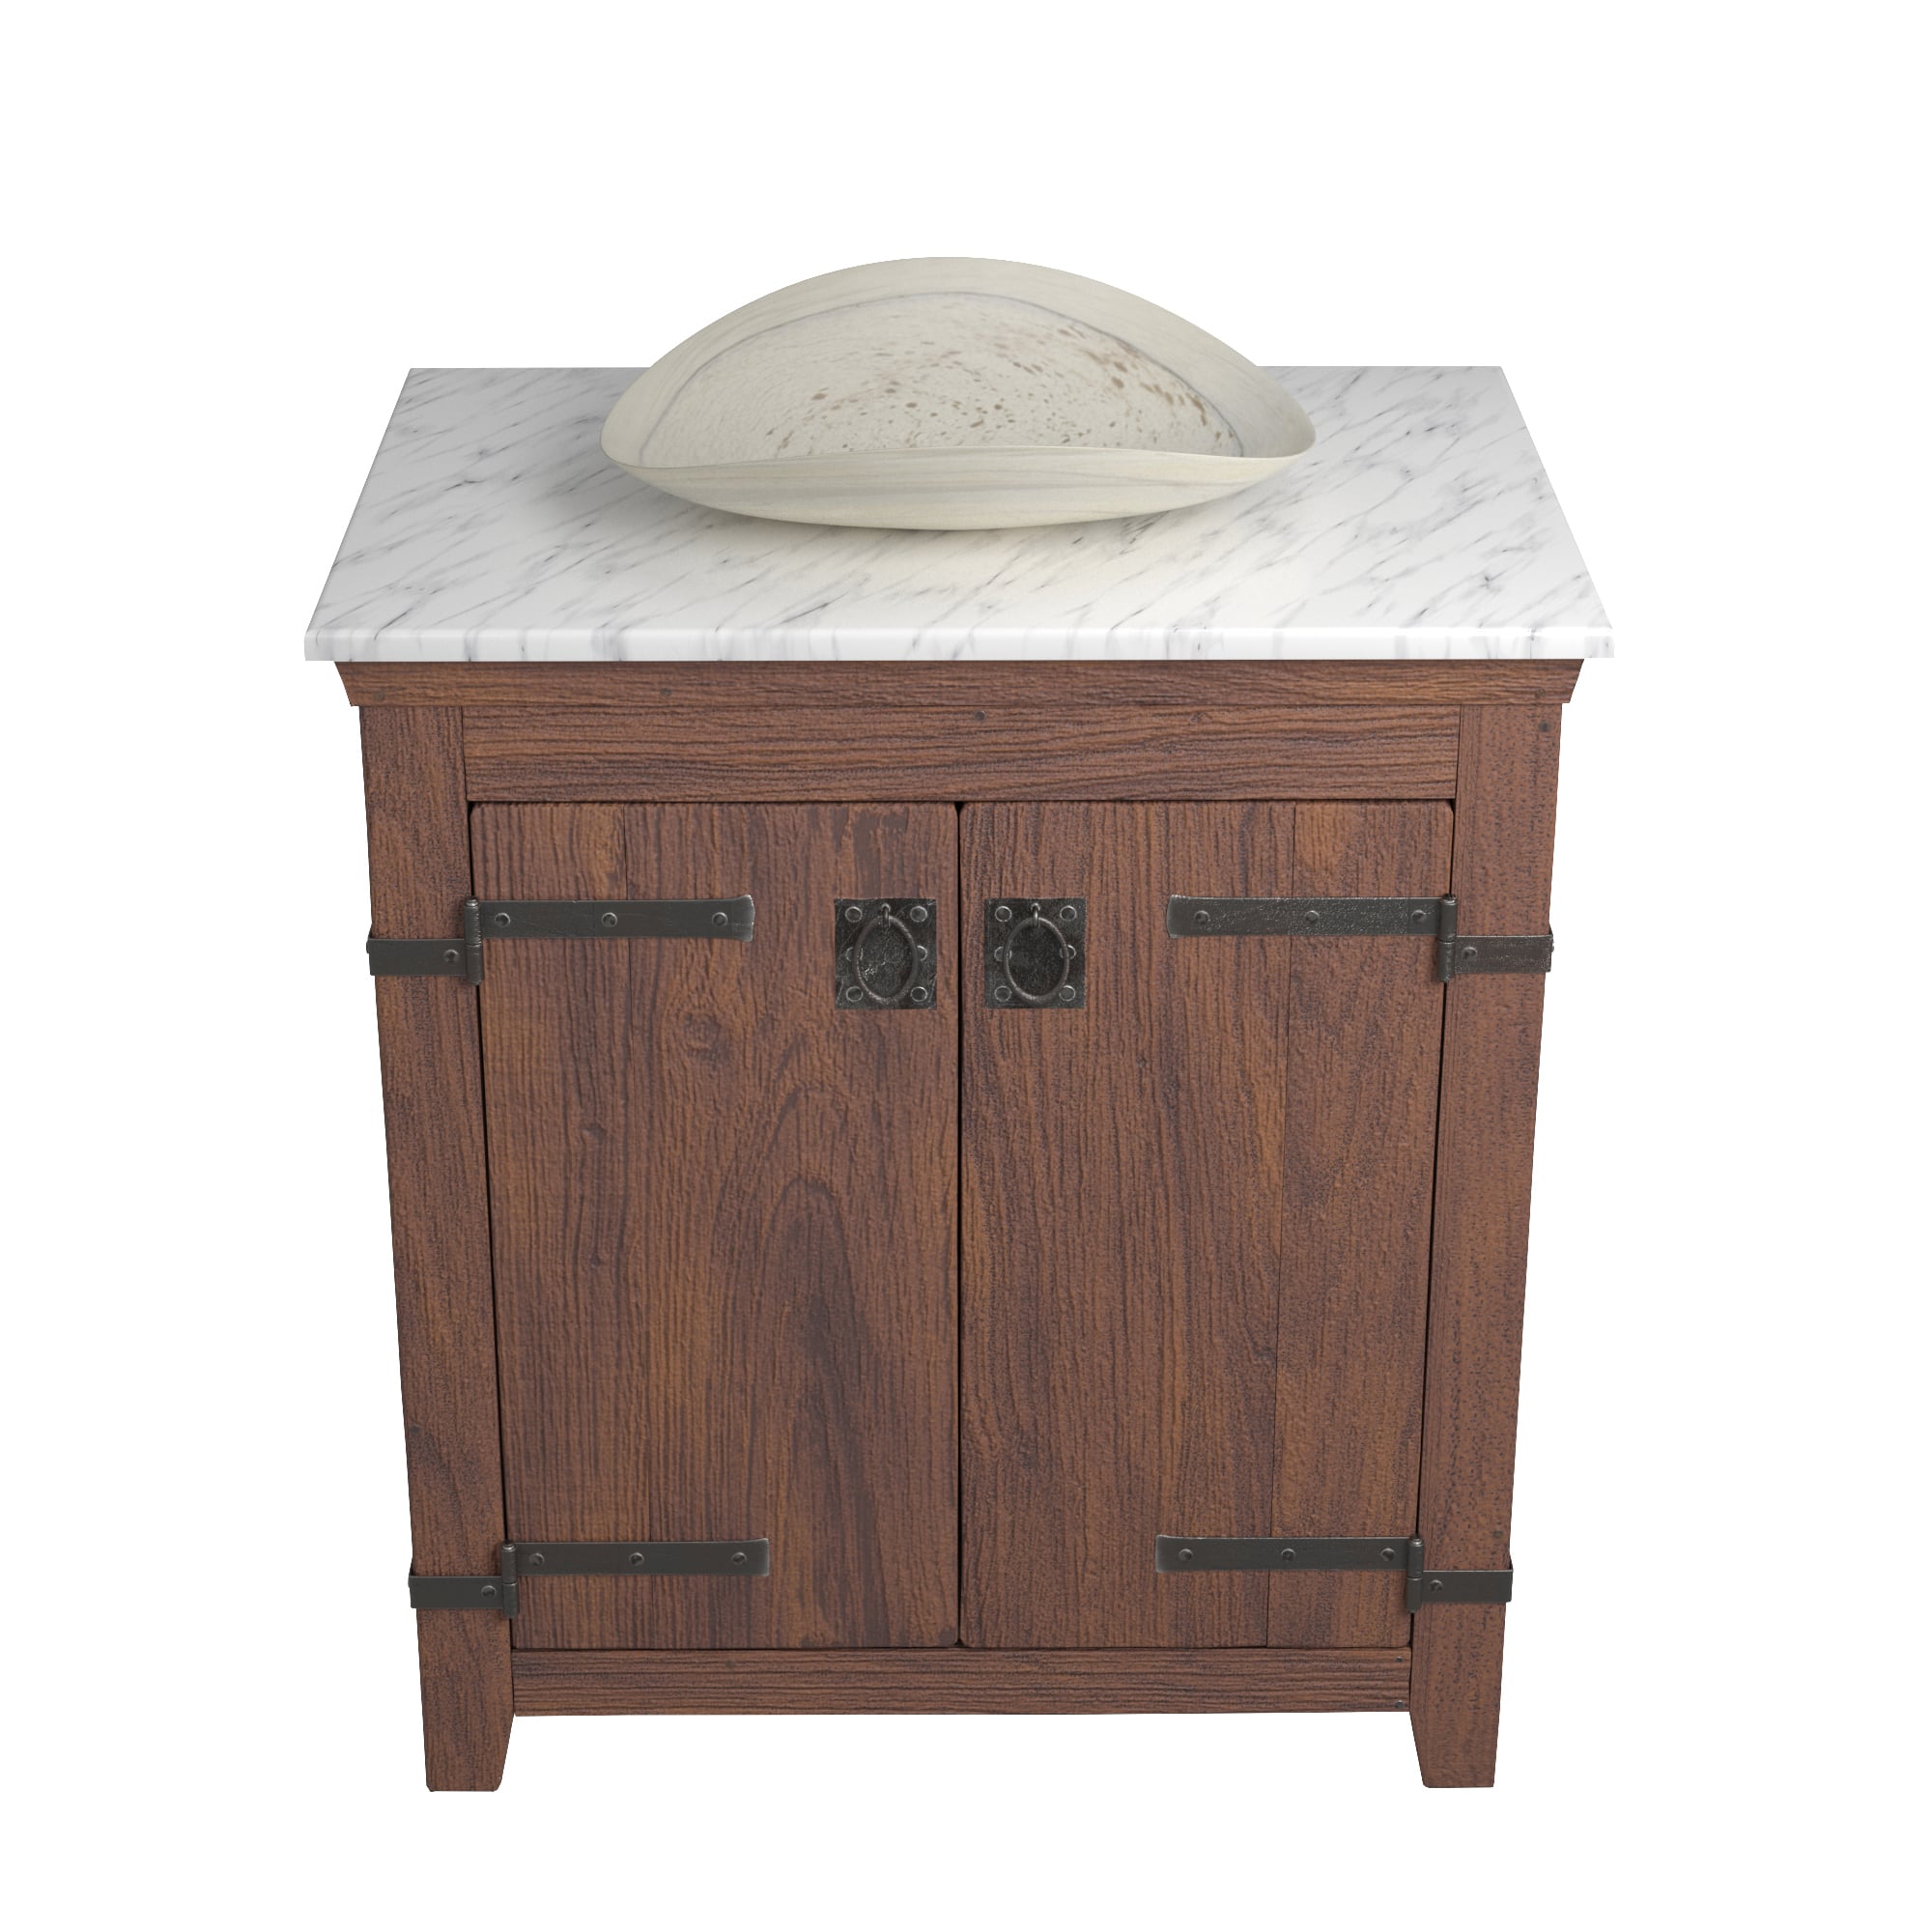 Native Trails 30" Americana Vanity in Chestnut with Carrara Marble Top and Verona in Abalone, No Faucet Hole, BND30-VB-CT-MG-060